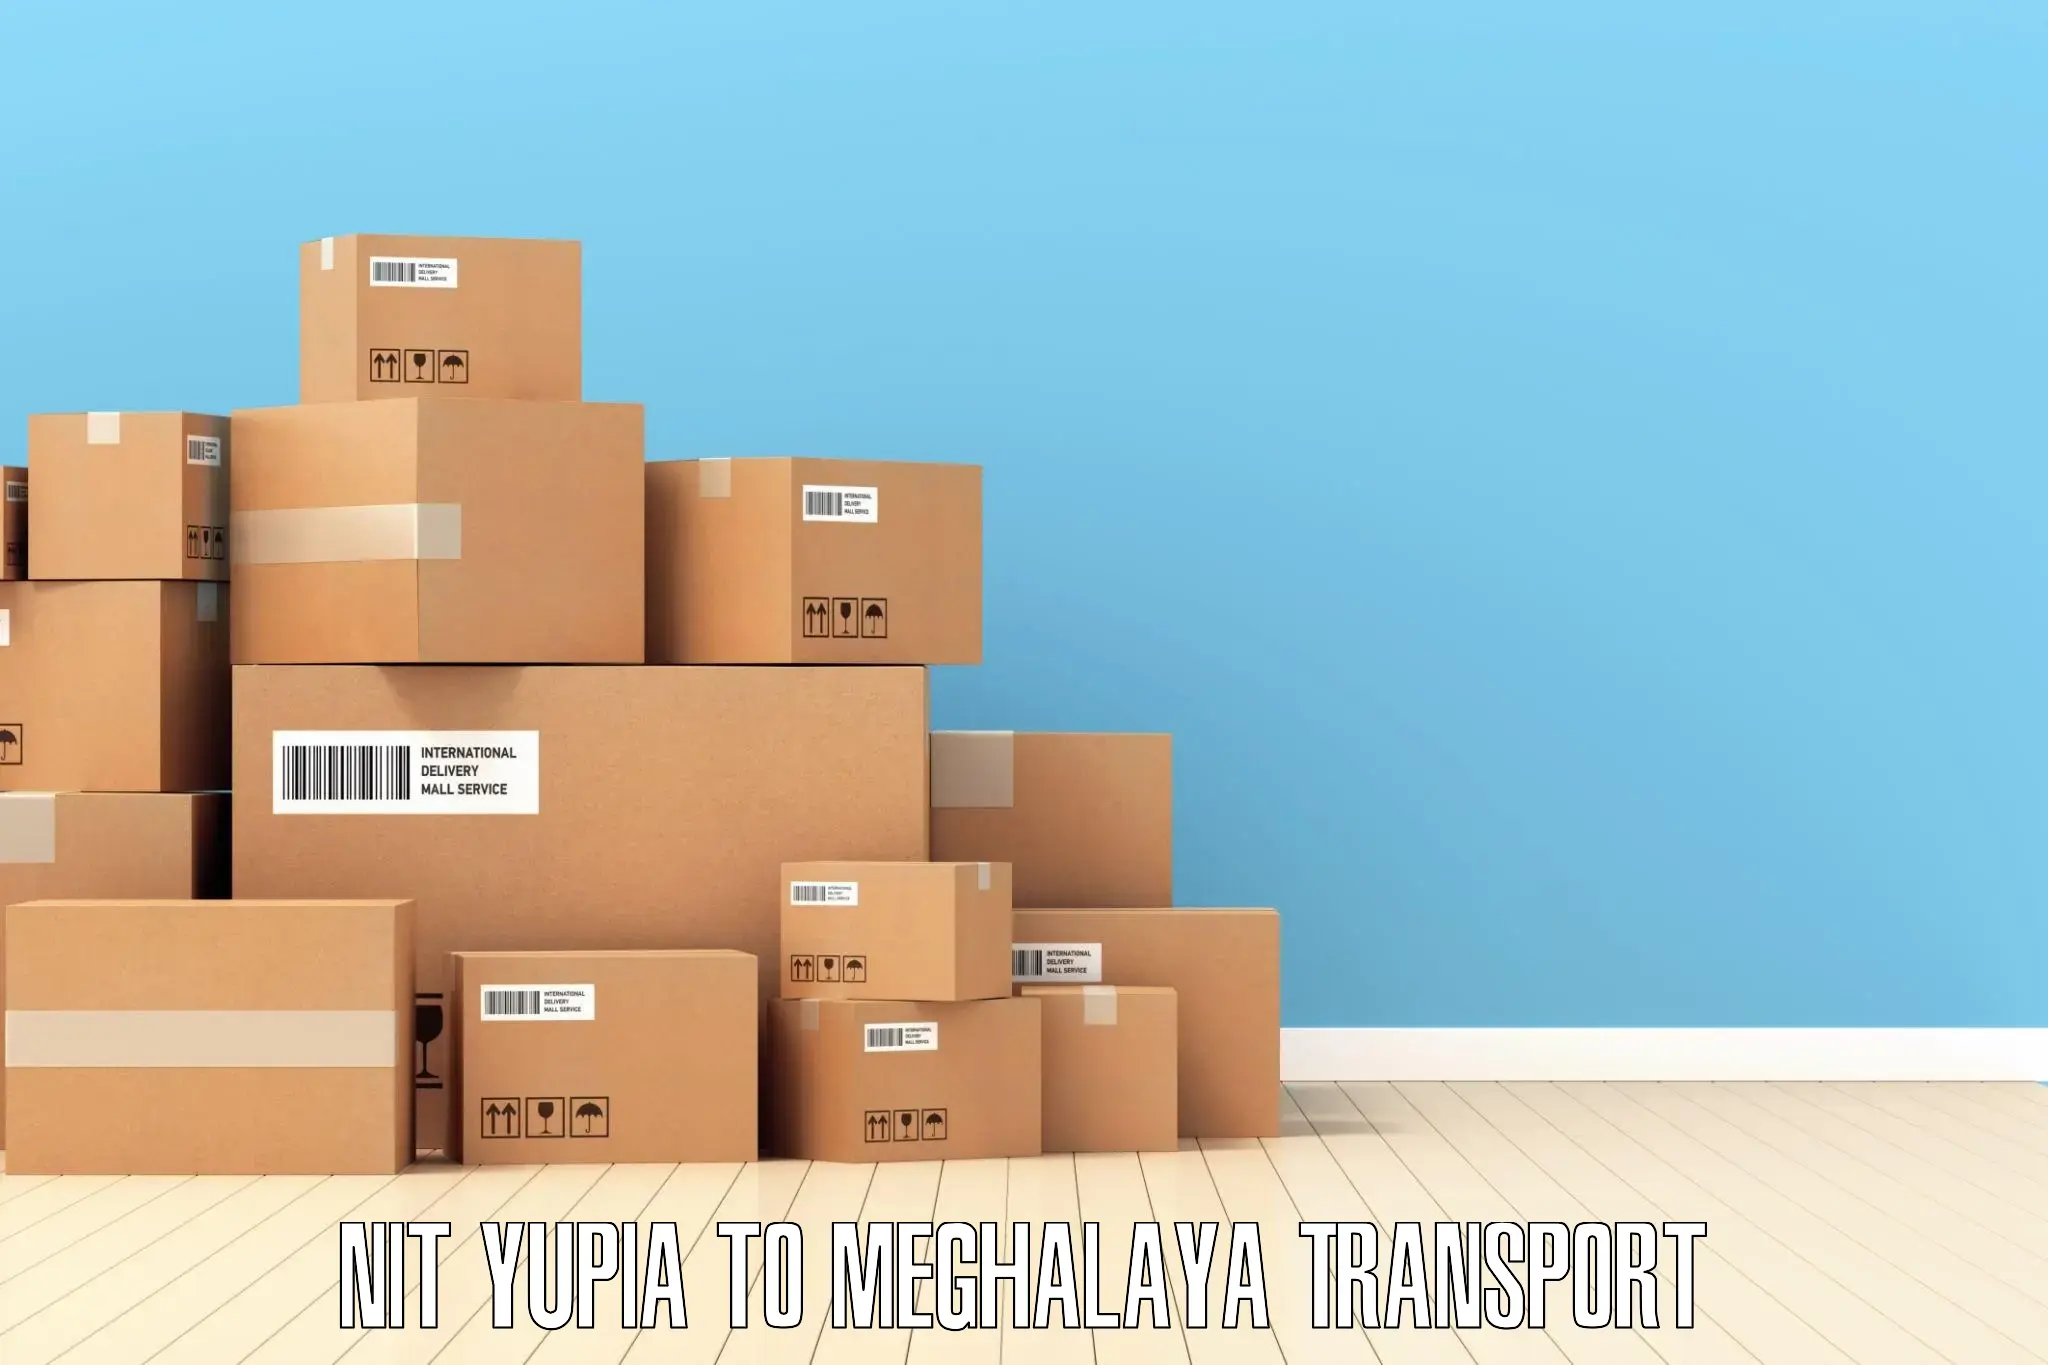 Container transport service NIT Yupia to Marshillong